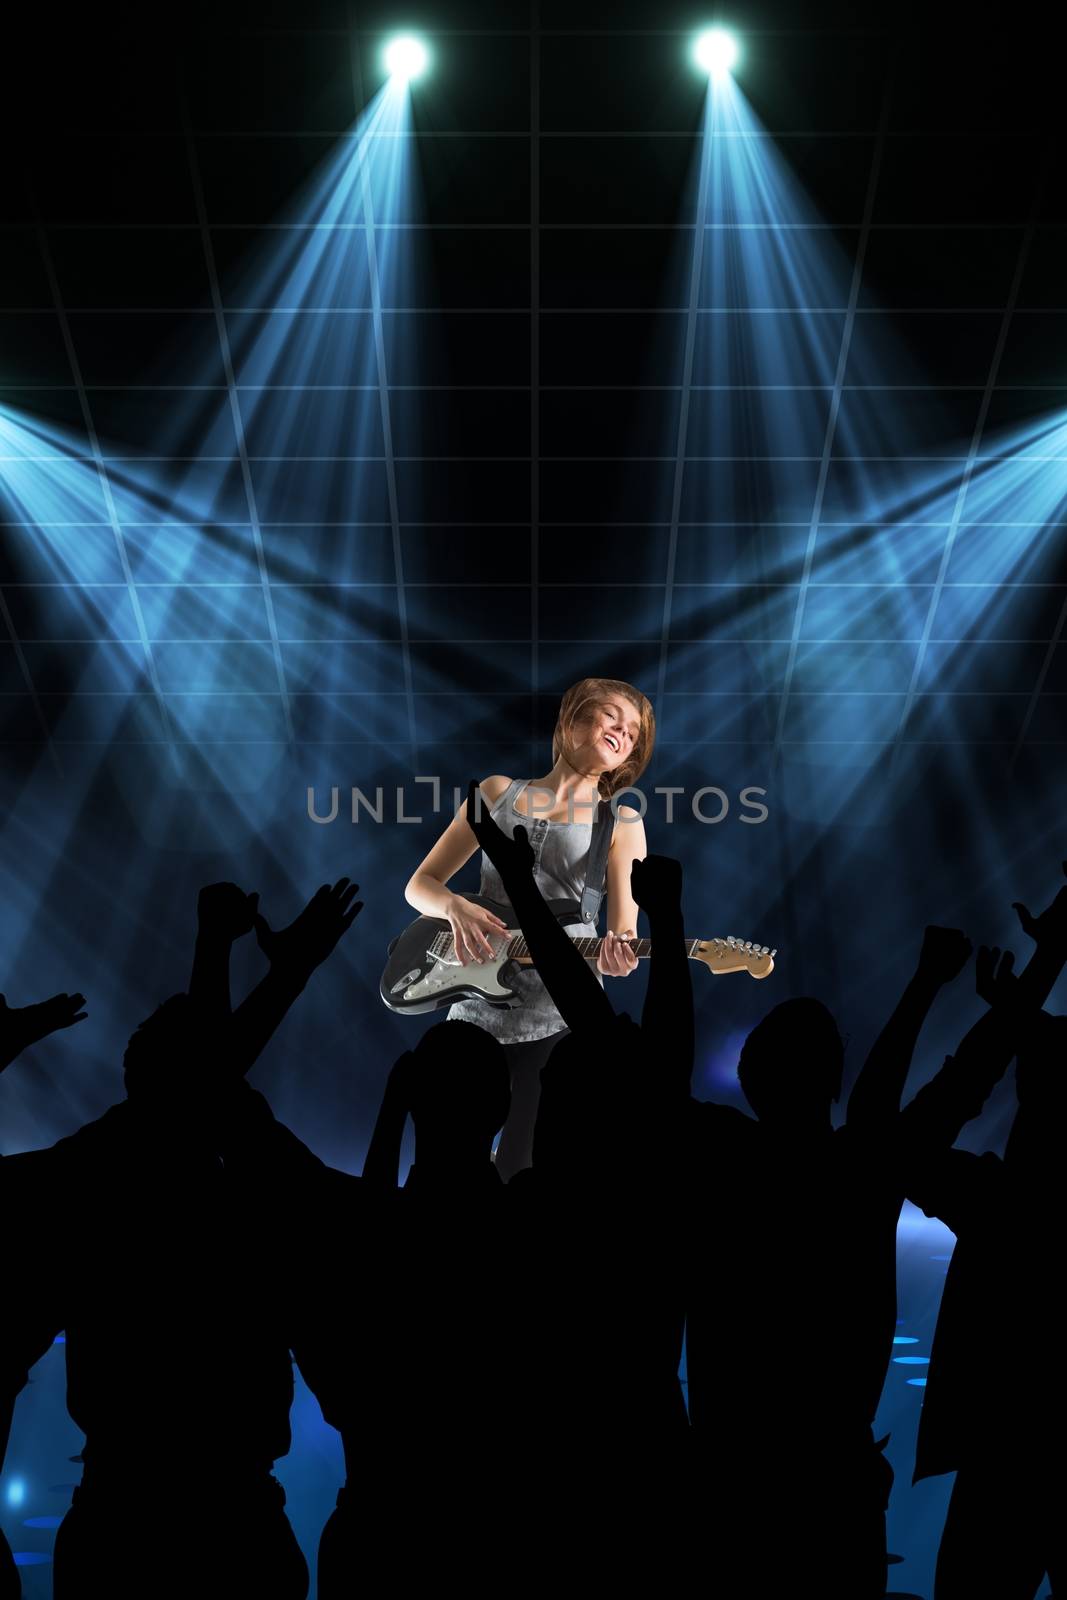 Composite image of people enjoying a concert in a black background